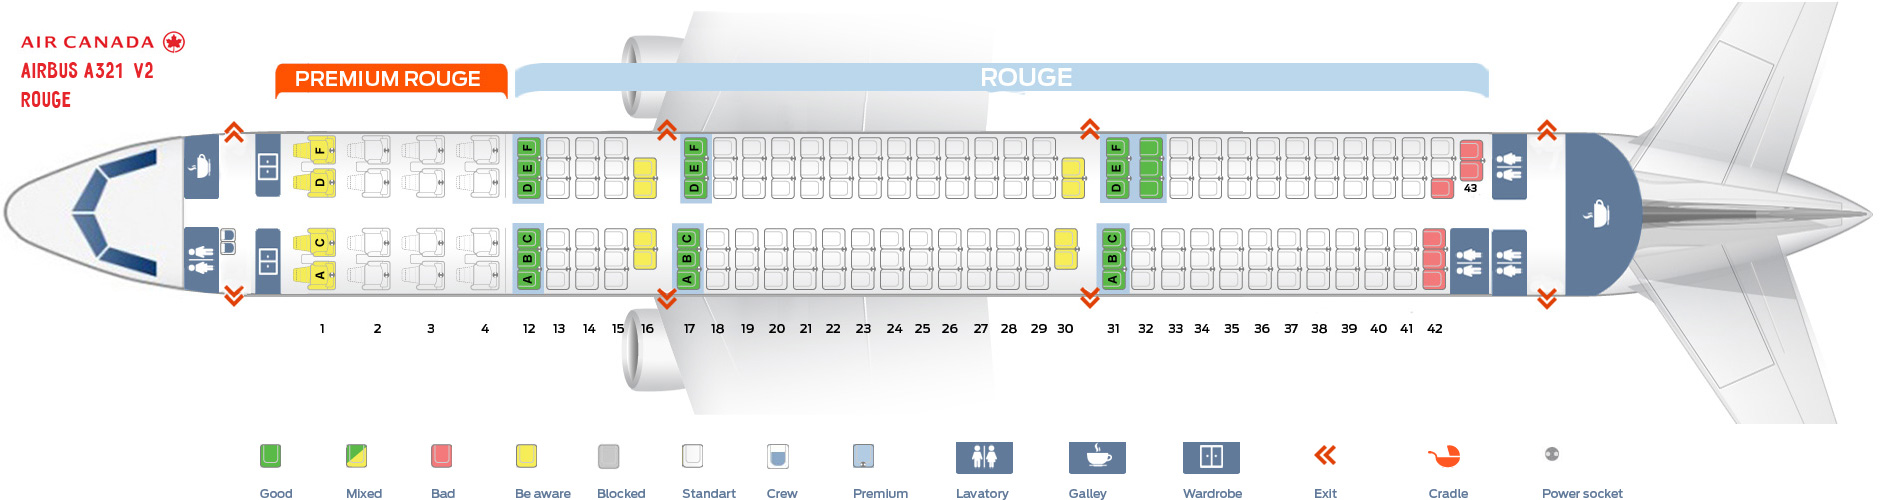 Seat Map and Seating Chart Airbus A321 200 Air Canada Rouge